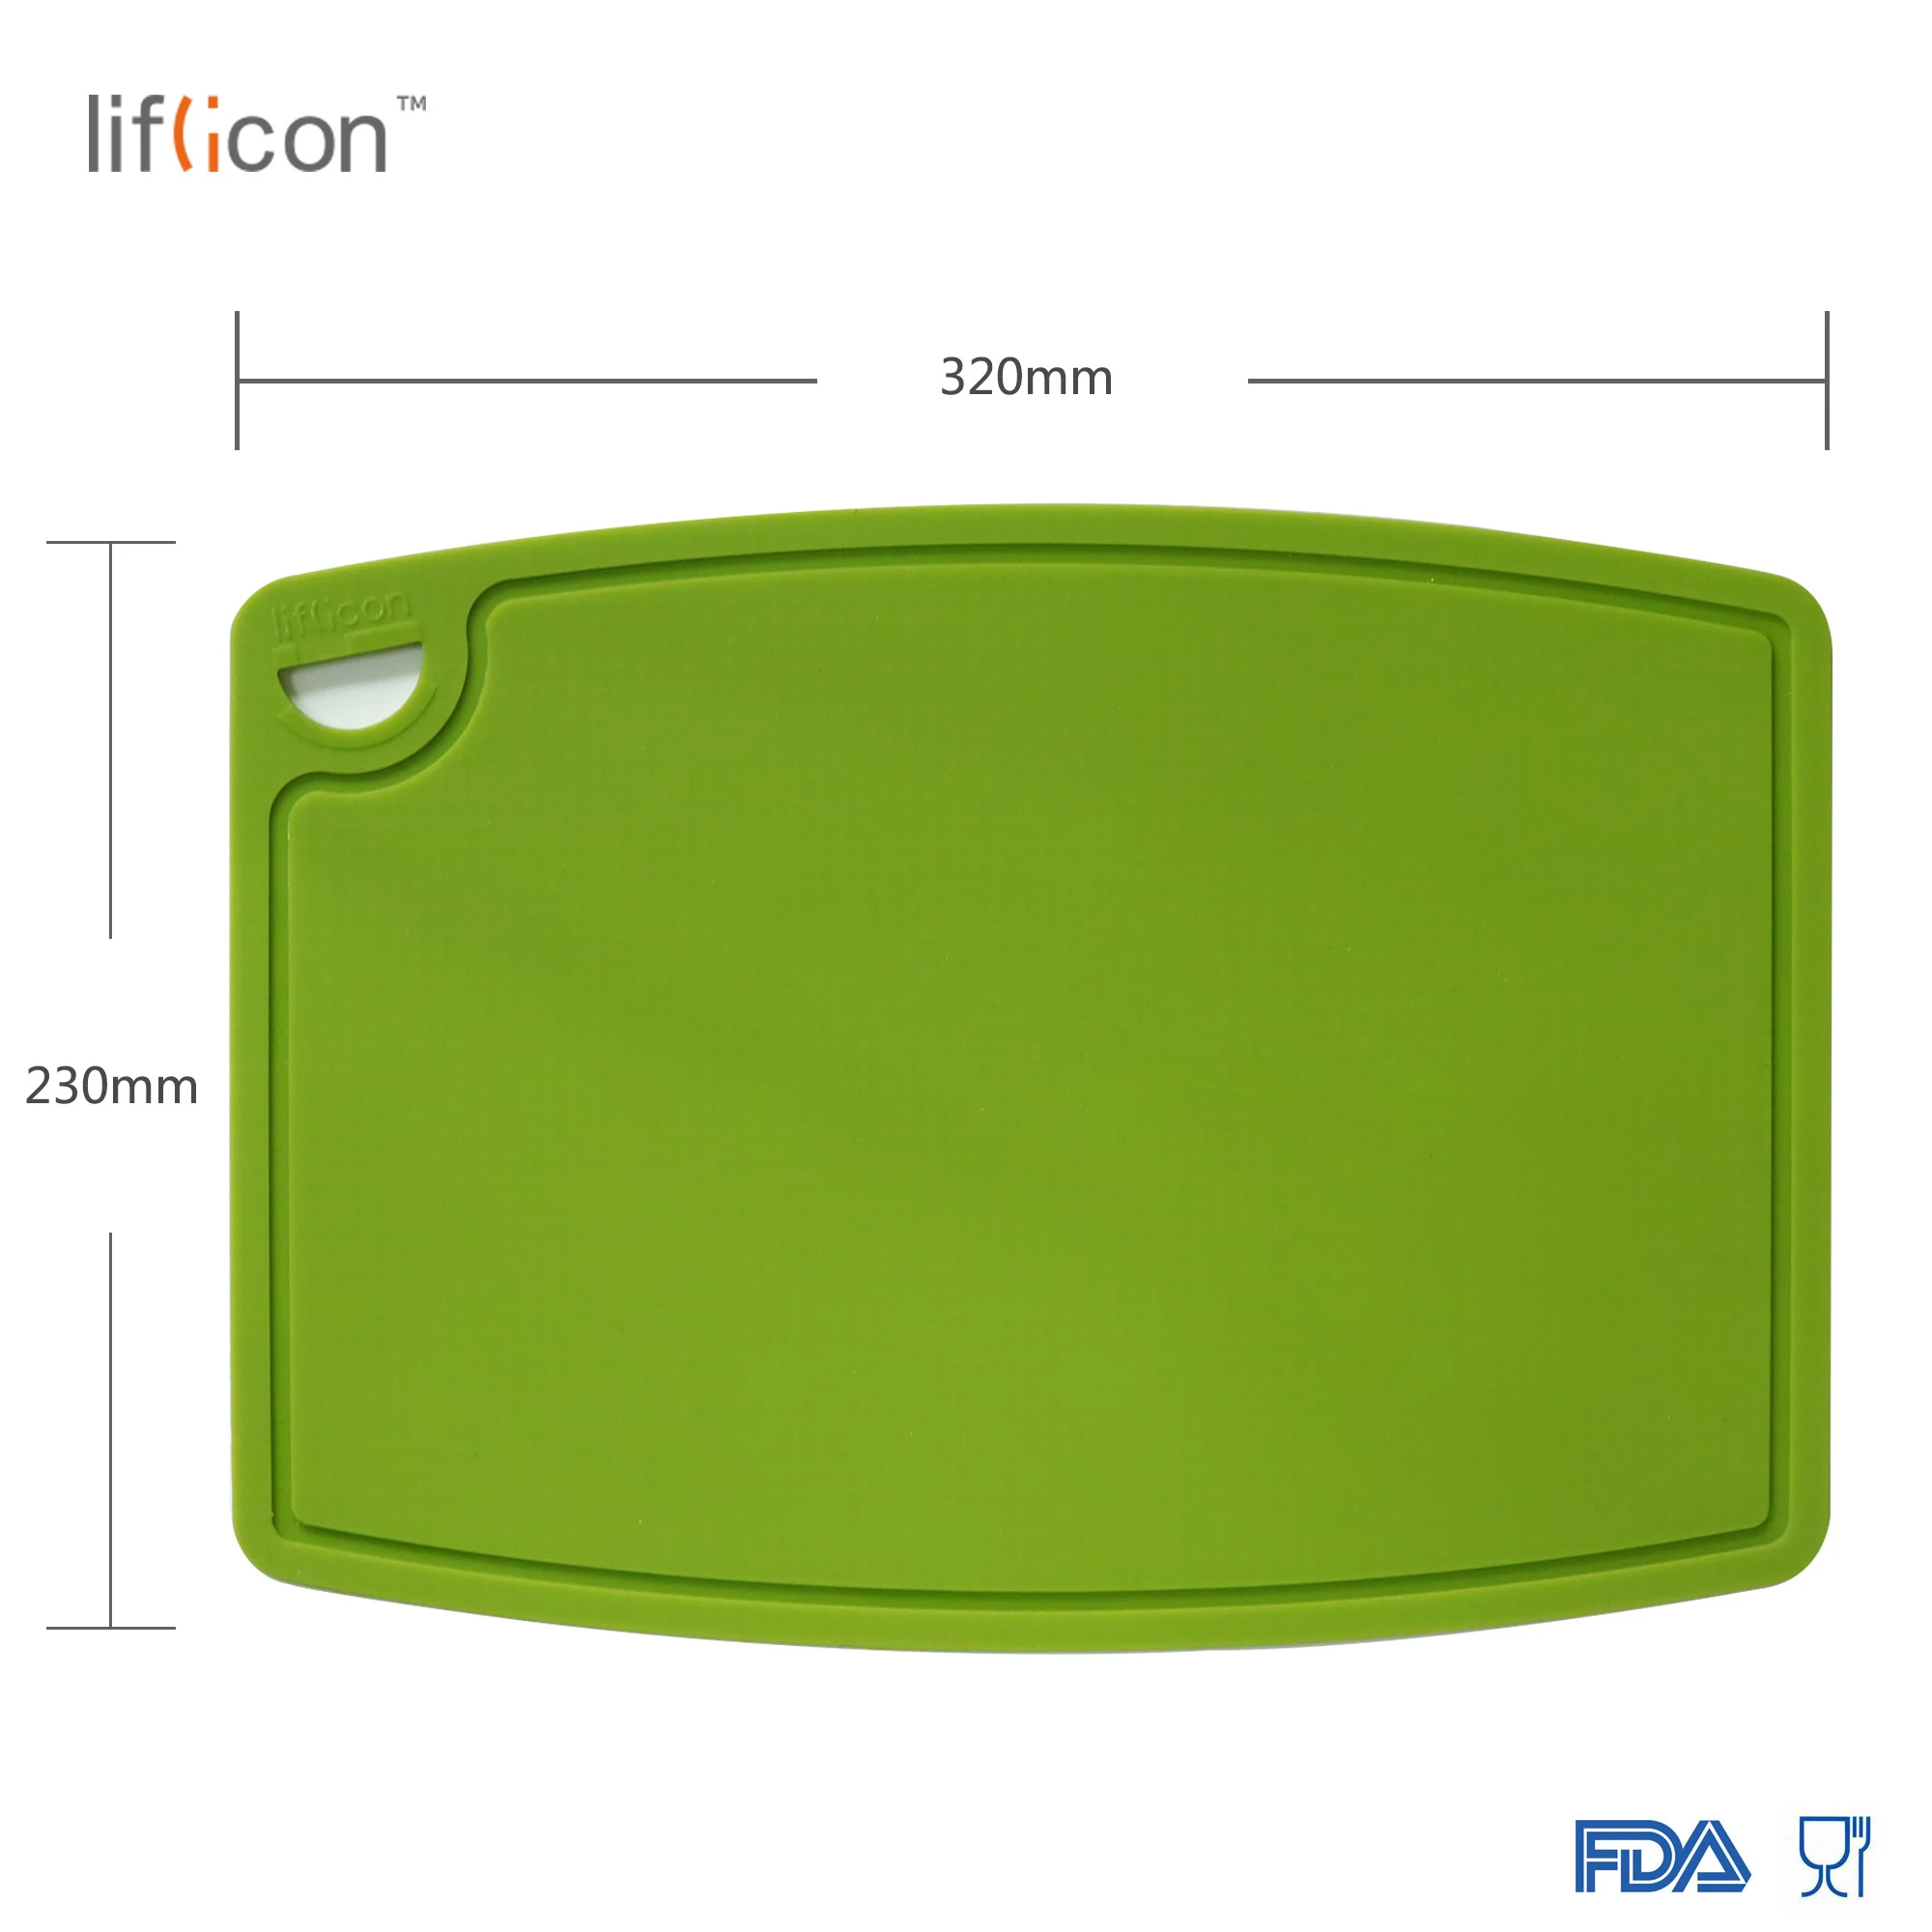 -Liflicon Silicone Chopping Board With Holder, Colored Kitchen Cutting Board Not Bamboo Walnut